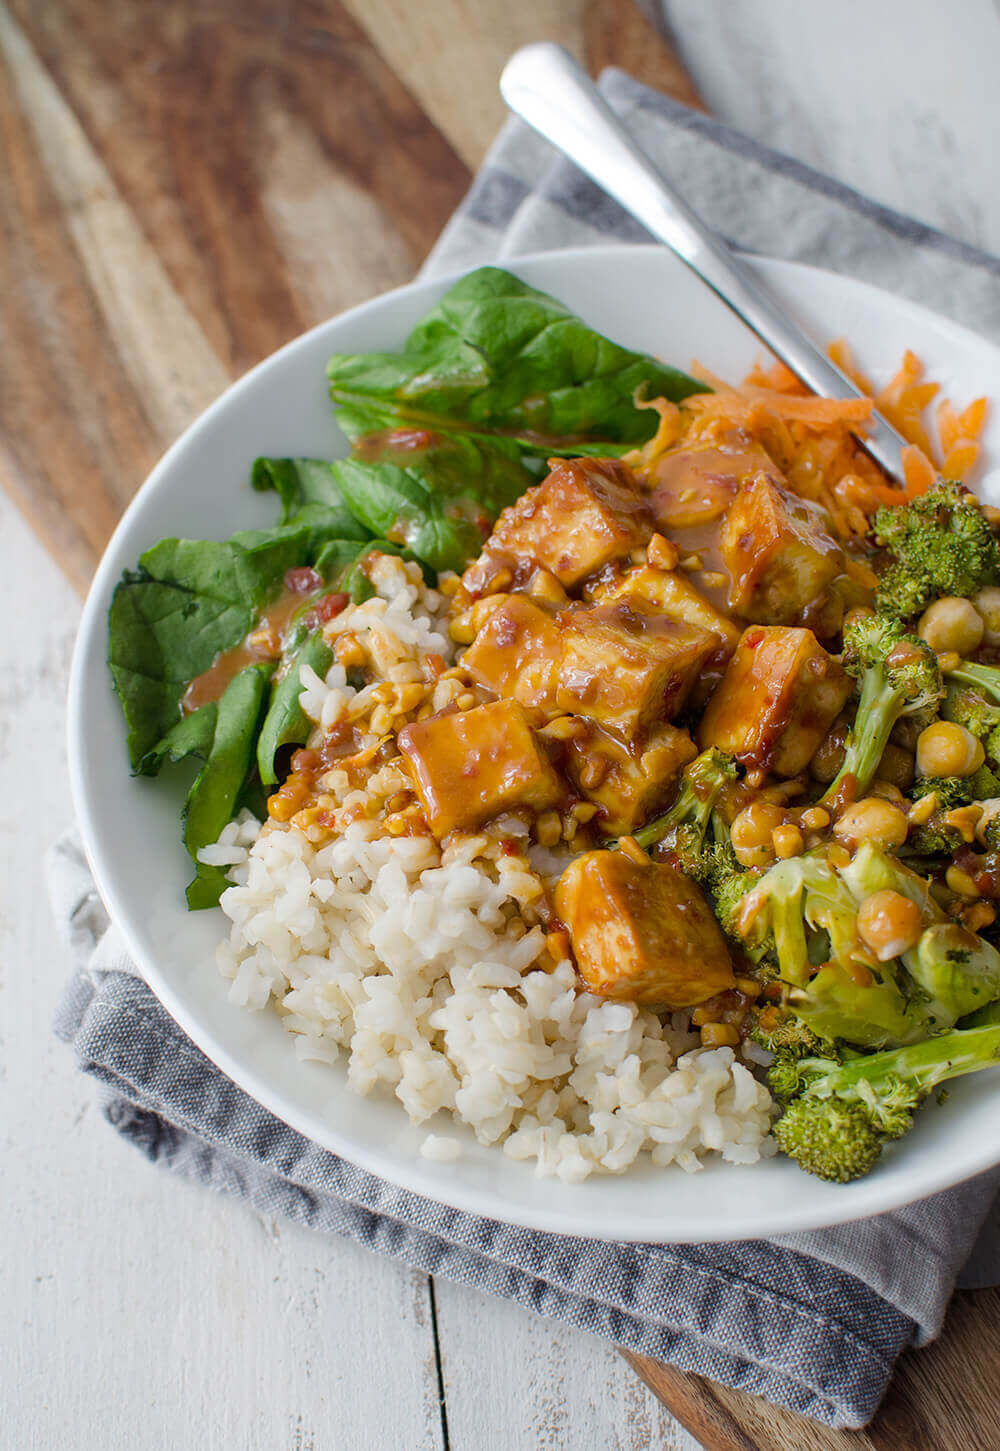 39 Amazing Vegan Recipes for Dinner too Yummy to Pass